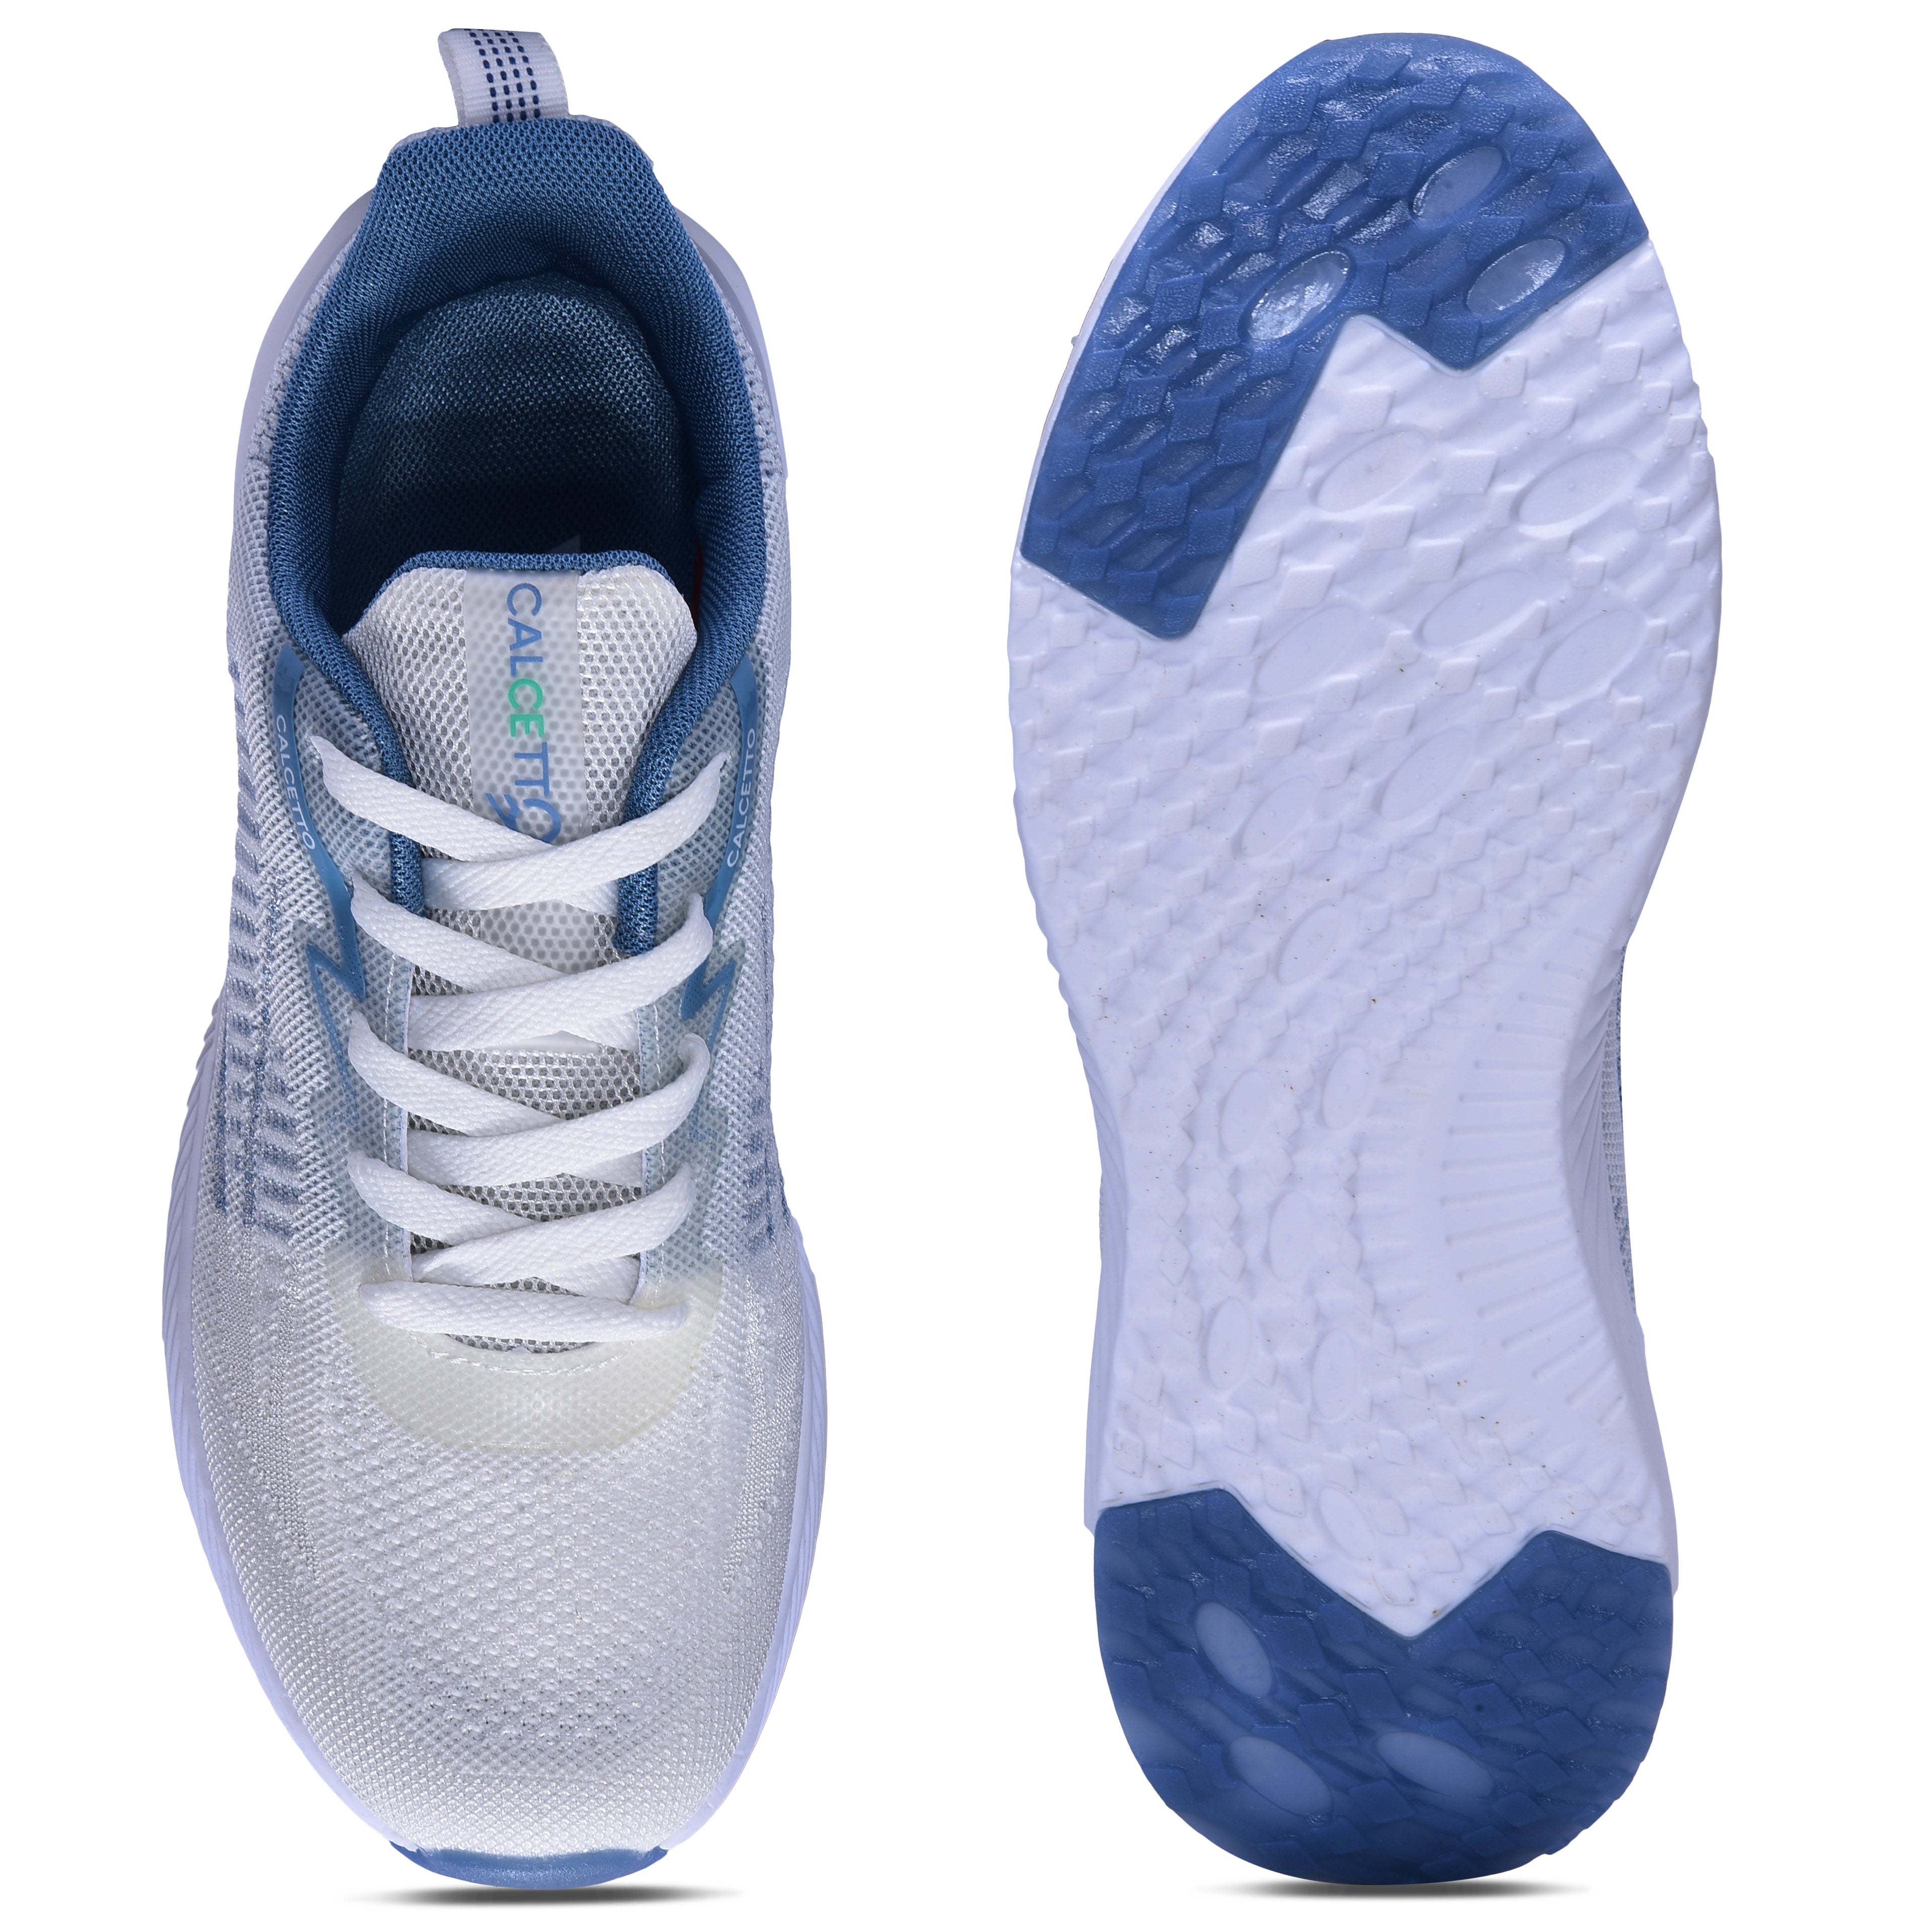 Calcetto CLT-0987 White Blue Running Shoe For Men